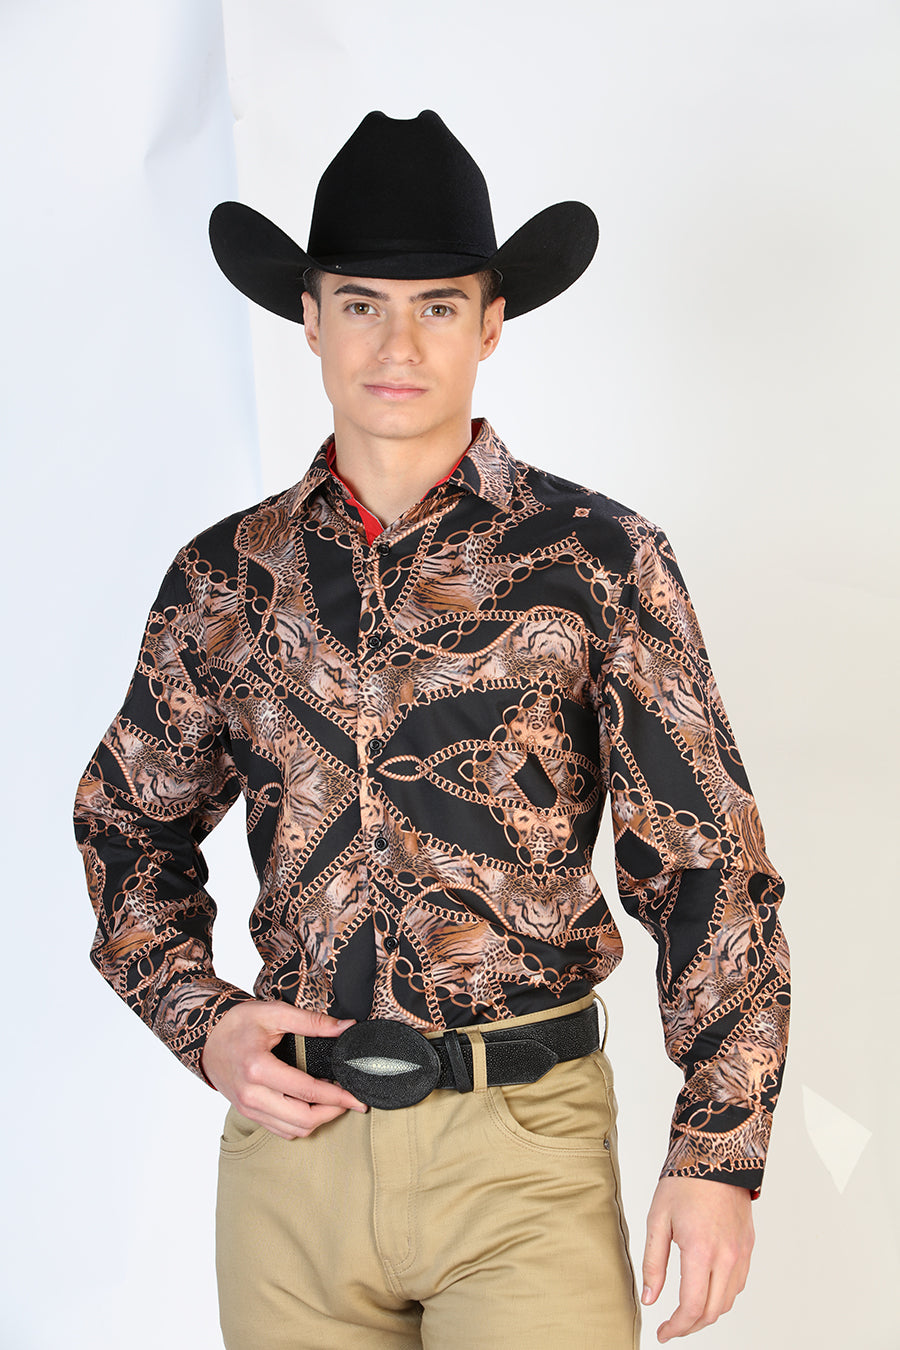 Long Sleeve Denim Shirt Printed Black Chains for Men 'The Lord of the Skies' - ID: 126267